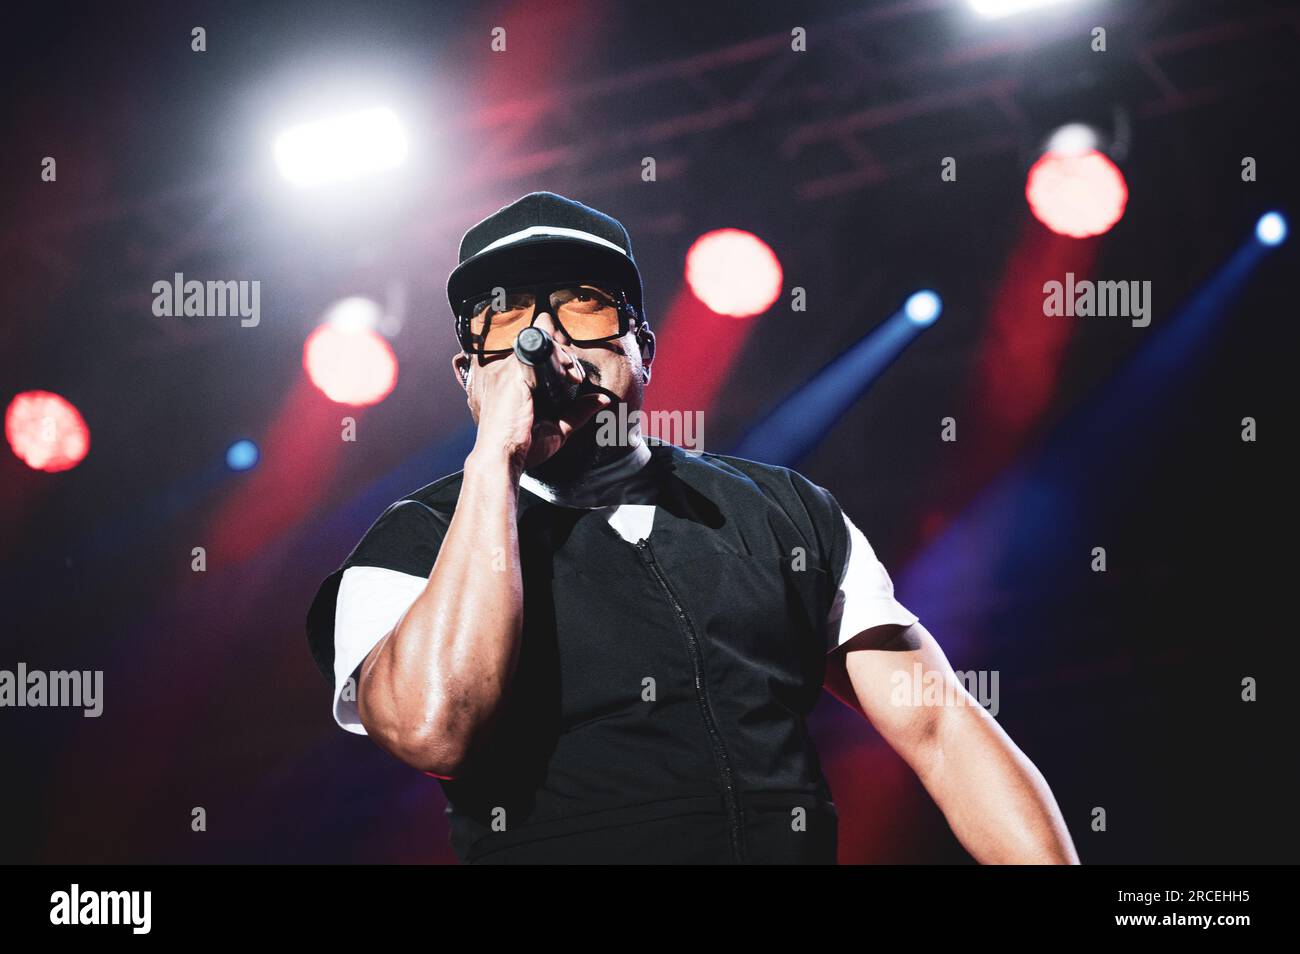 TORINO, STUPINIGI SONIC PARK FESTIVAL 2023, ITALY: Apl.de.ap (real name Allan Pineda Lindo) of the American musical group consisting of rappers called Black Eyed Peas performing live at the Stupinigi Sonic Park festival Stock Photo